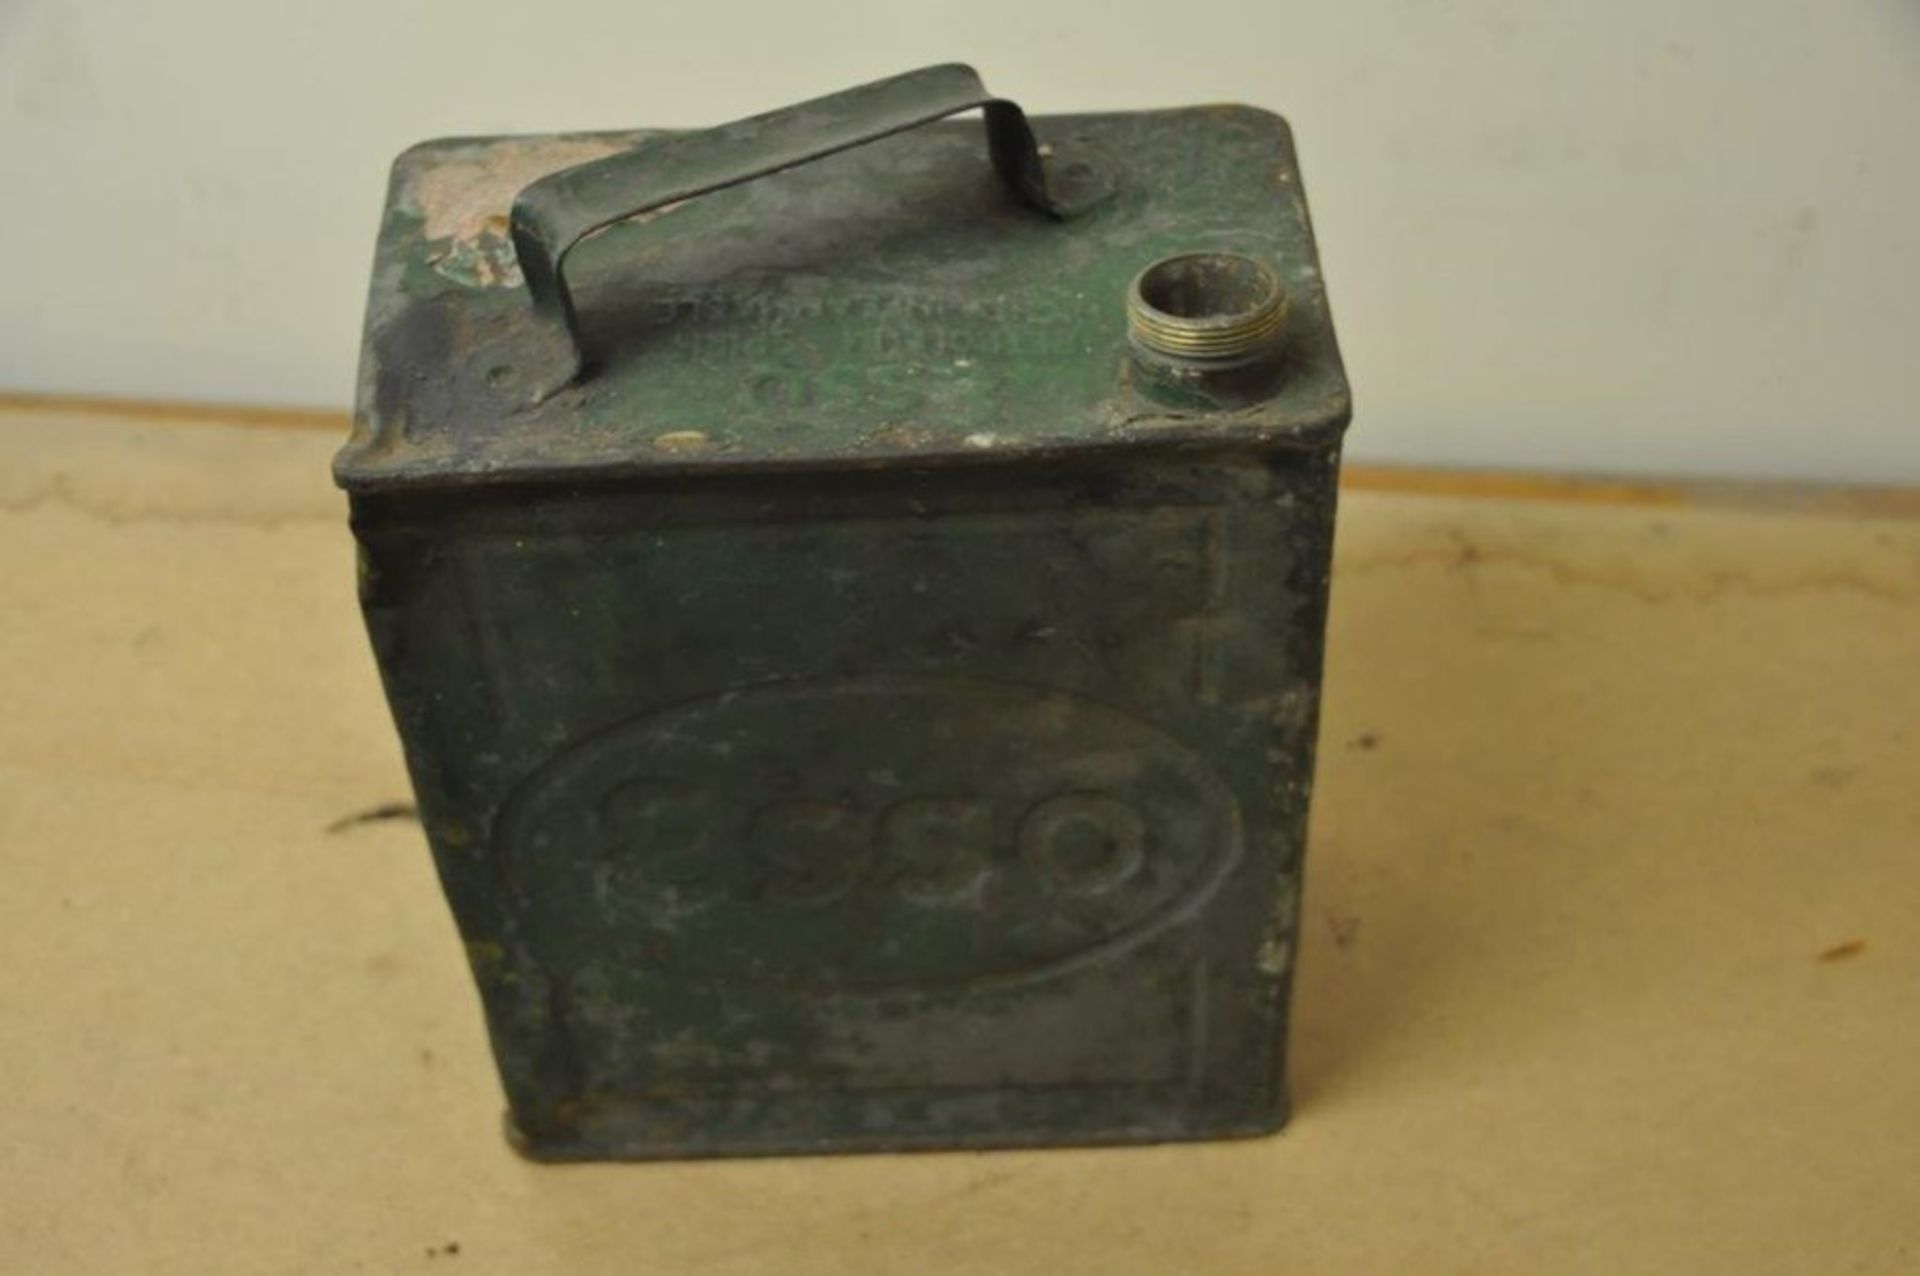 Vintage Esso Petrol Can - Image 3 of 3